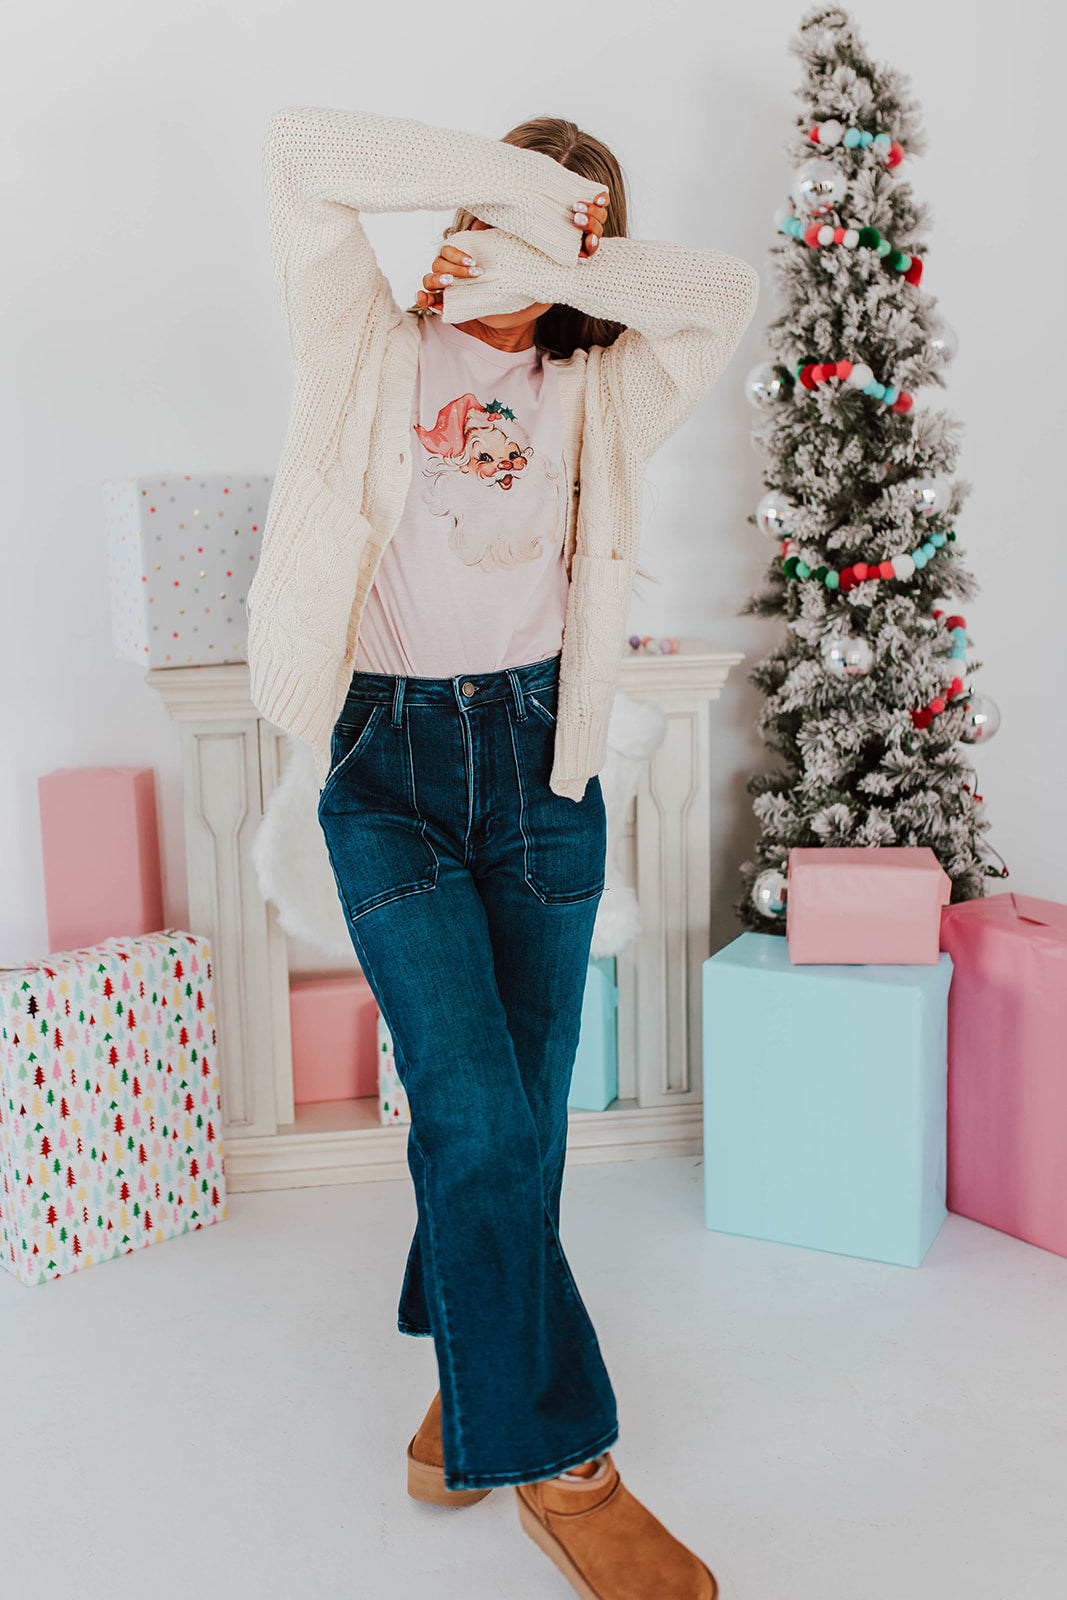 THE VINTAGE KRIS KRINGLE GRAPHIC TEE IN LIGHT PINK